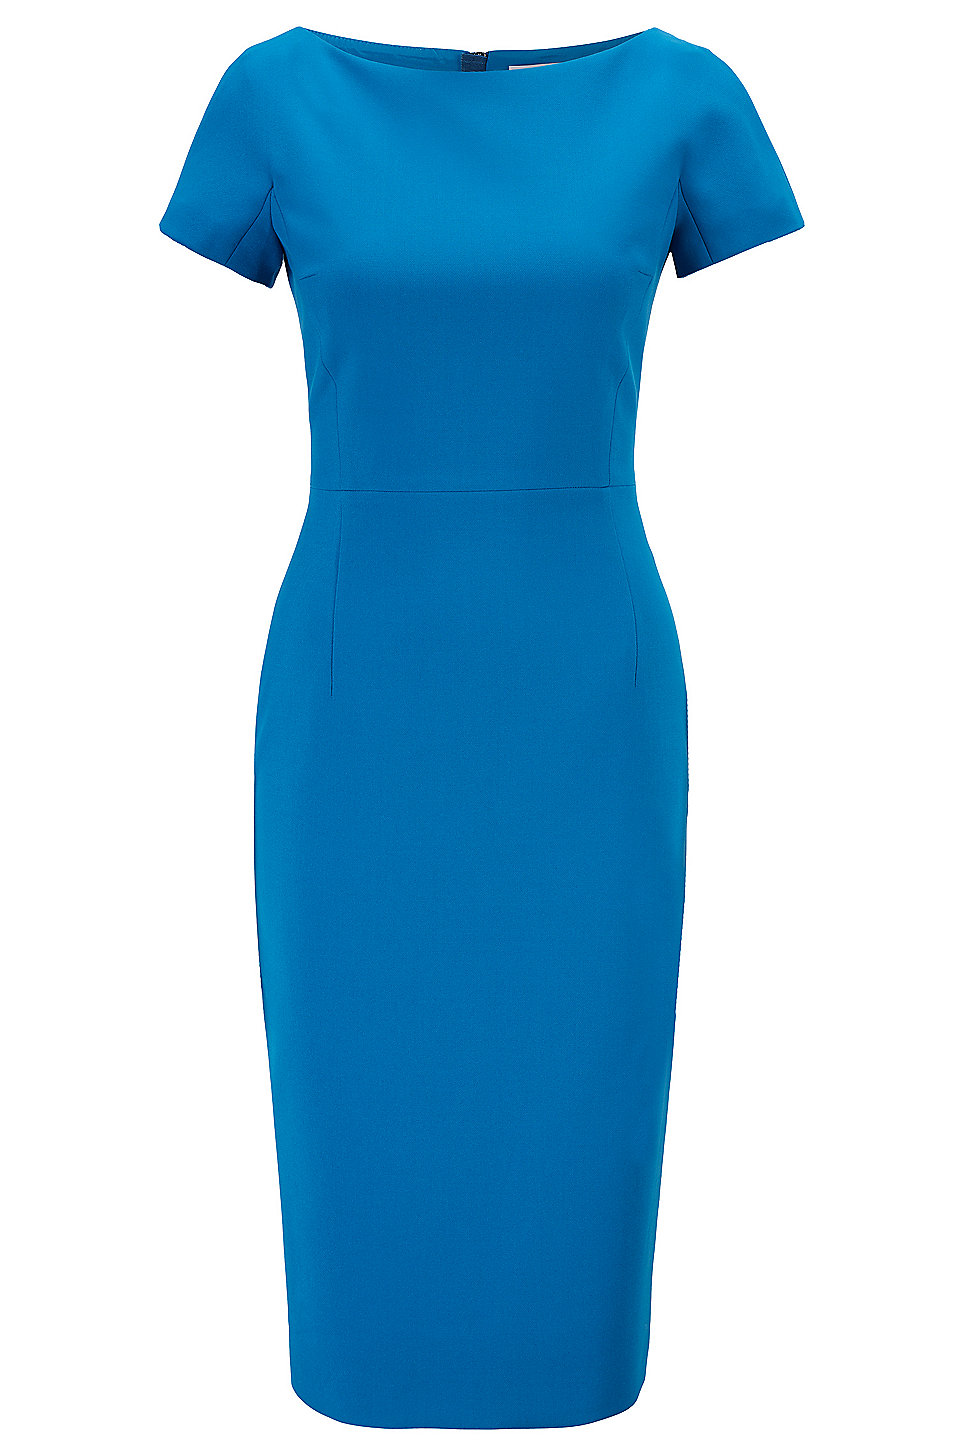 BOSS - Wide-neck shift dress with exposed center-back zip